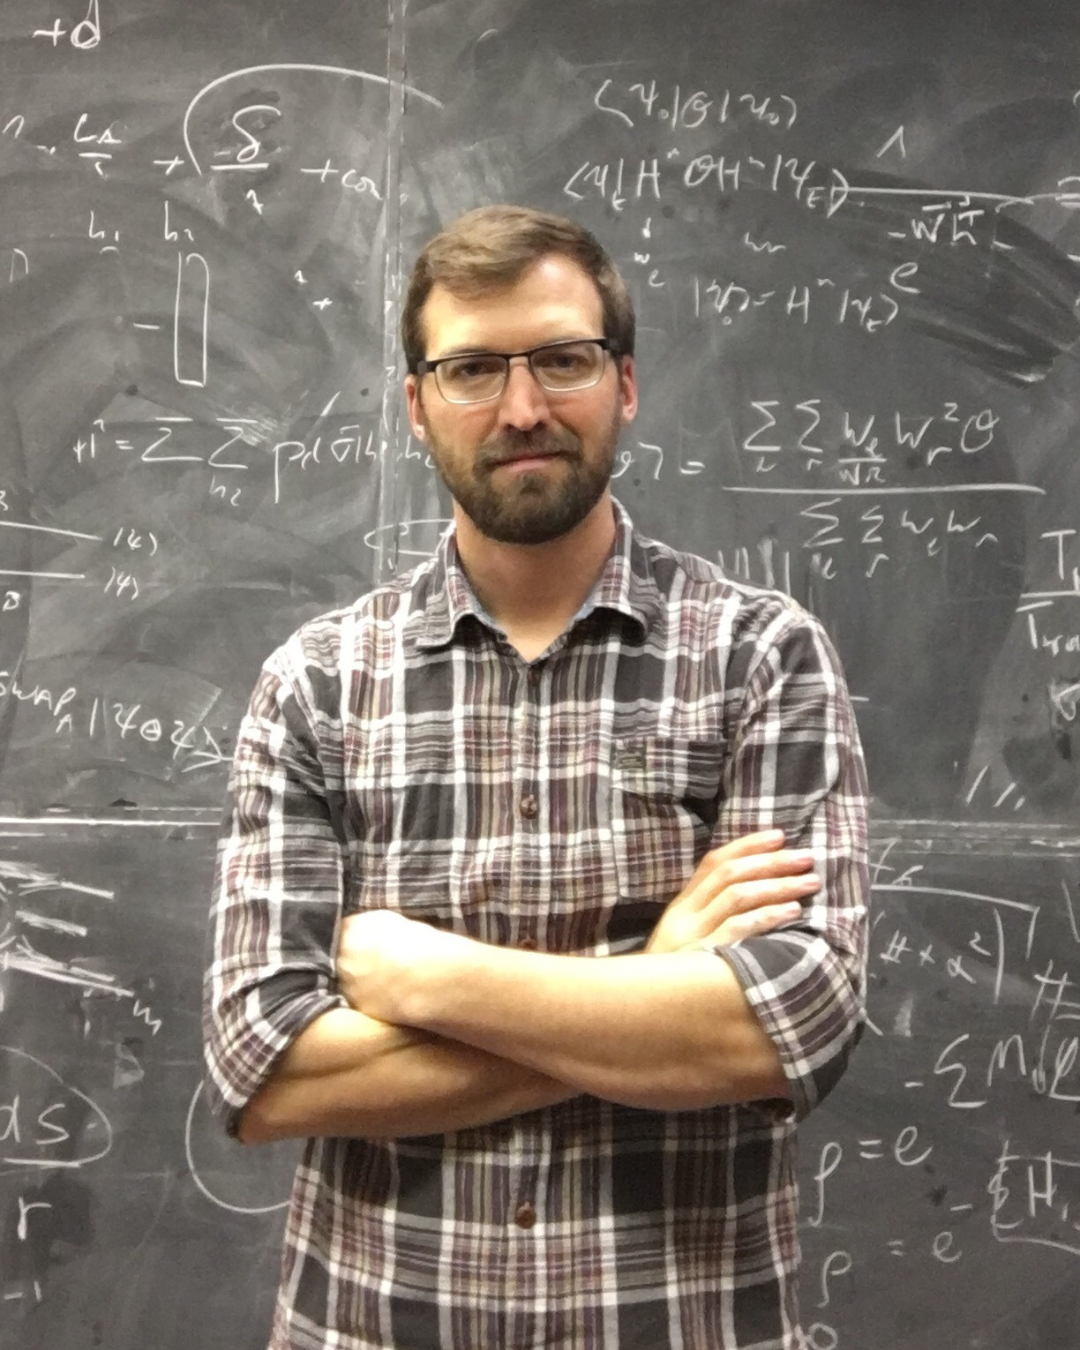 Roger Melko is a Professor of Physics in the Faculty of Science. He is standing with his arms crossed in front of a blackboard.